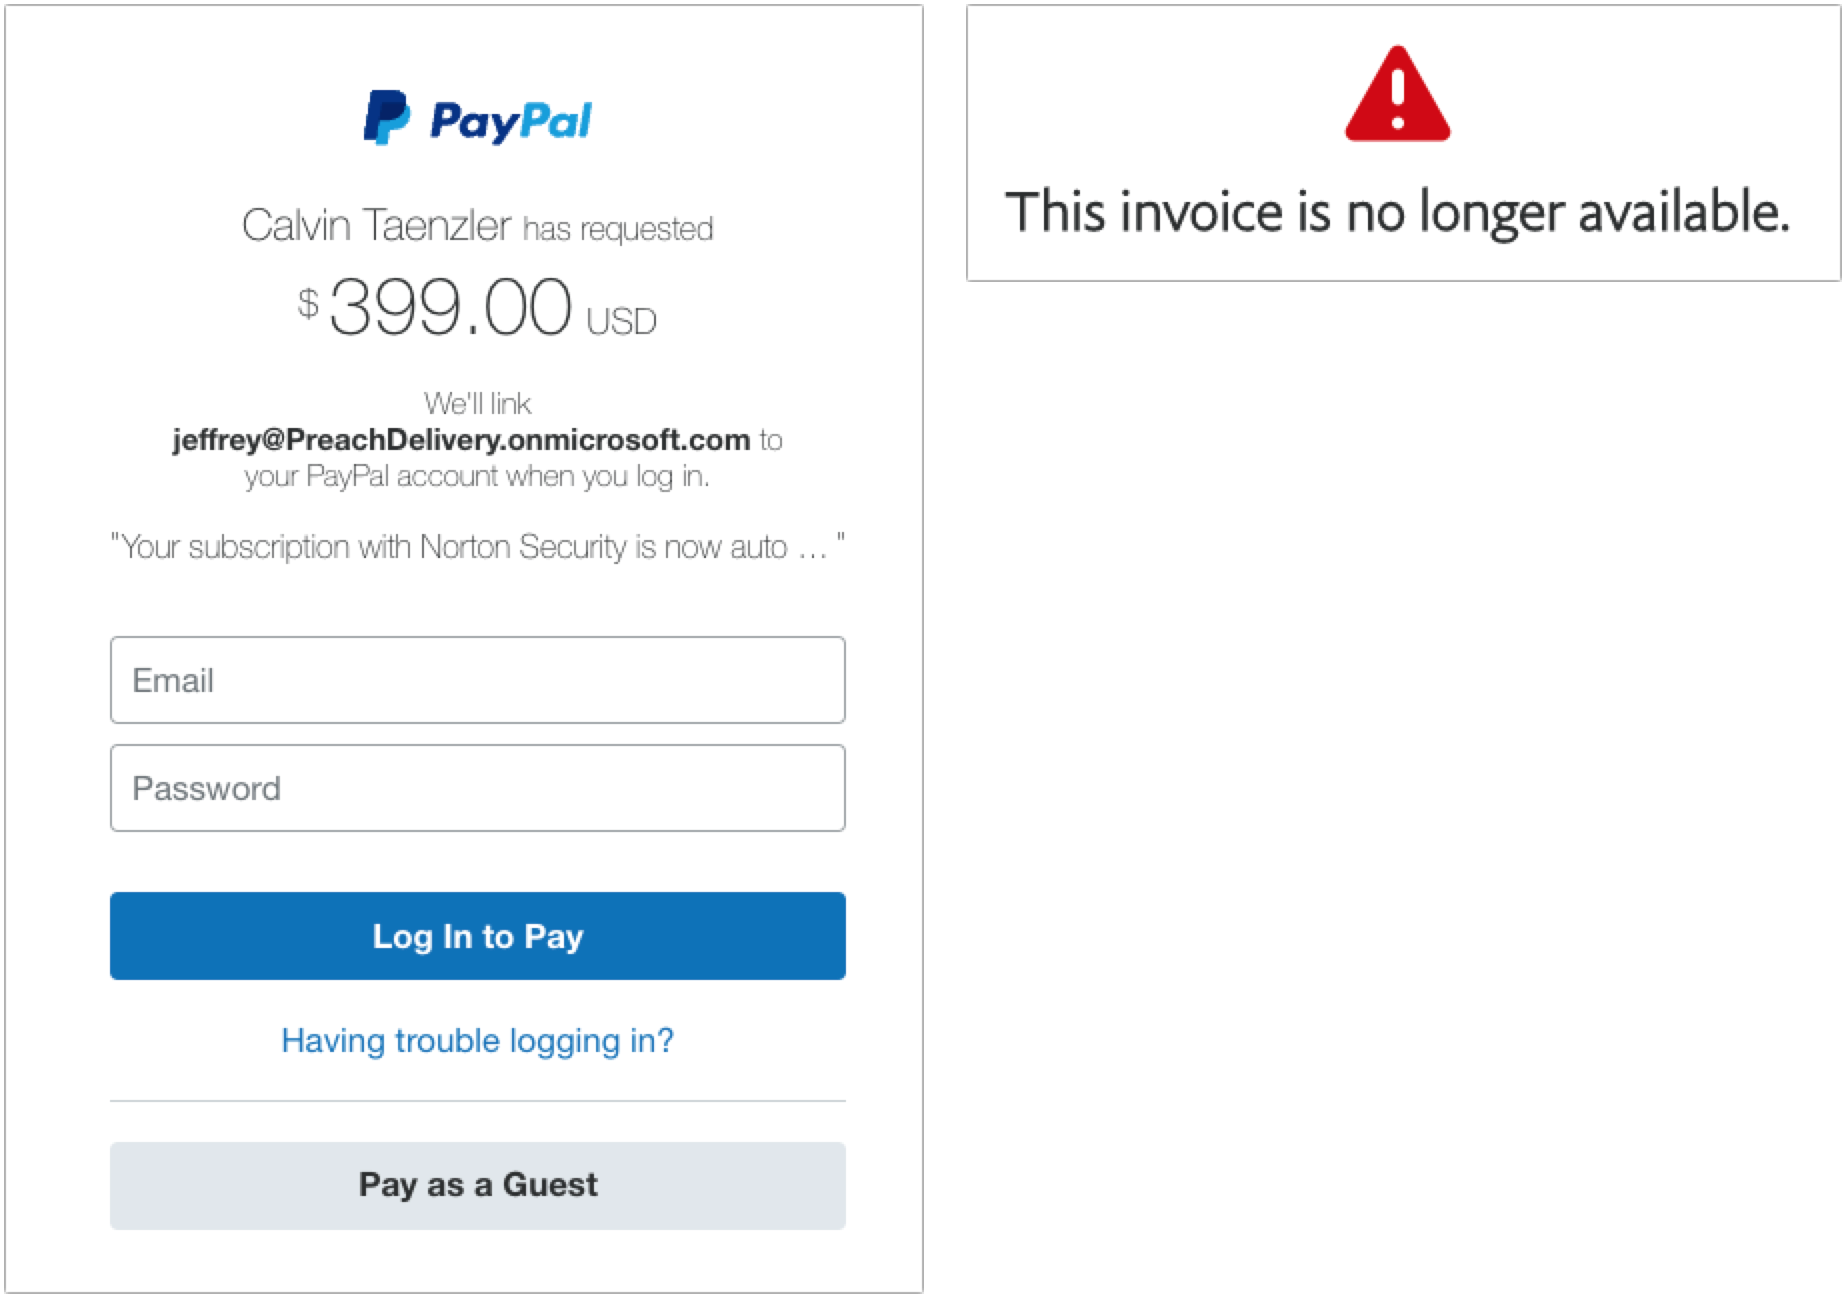 Results of clicking through from PayPal phishing